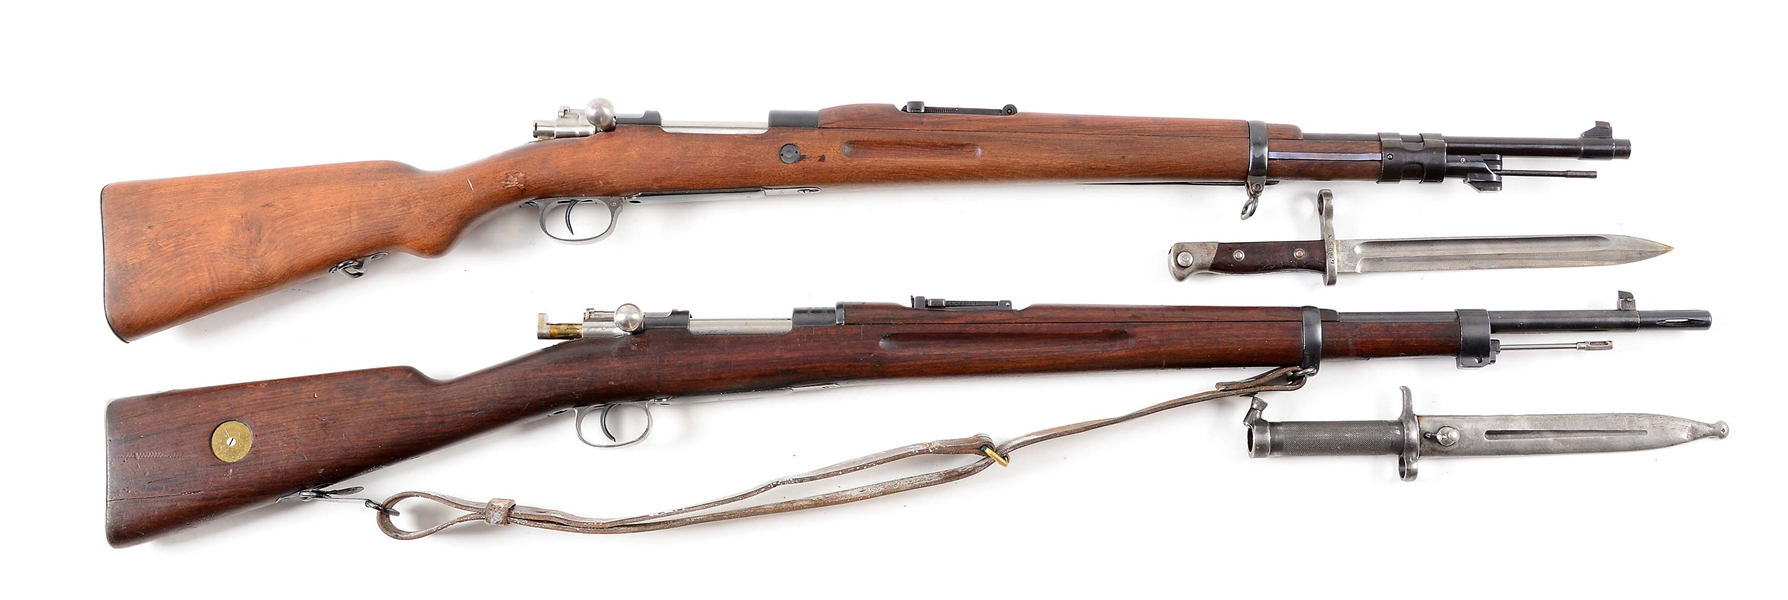 (C) LOT OF 2 FOREIGN MAUSER MILITARY BOLT ACTION RIFLES: MEXICAN LA CORUNA & SWEDISH M38 WITH BAYONETS.